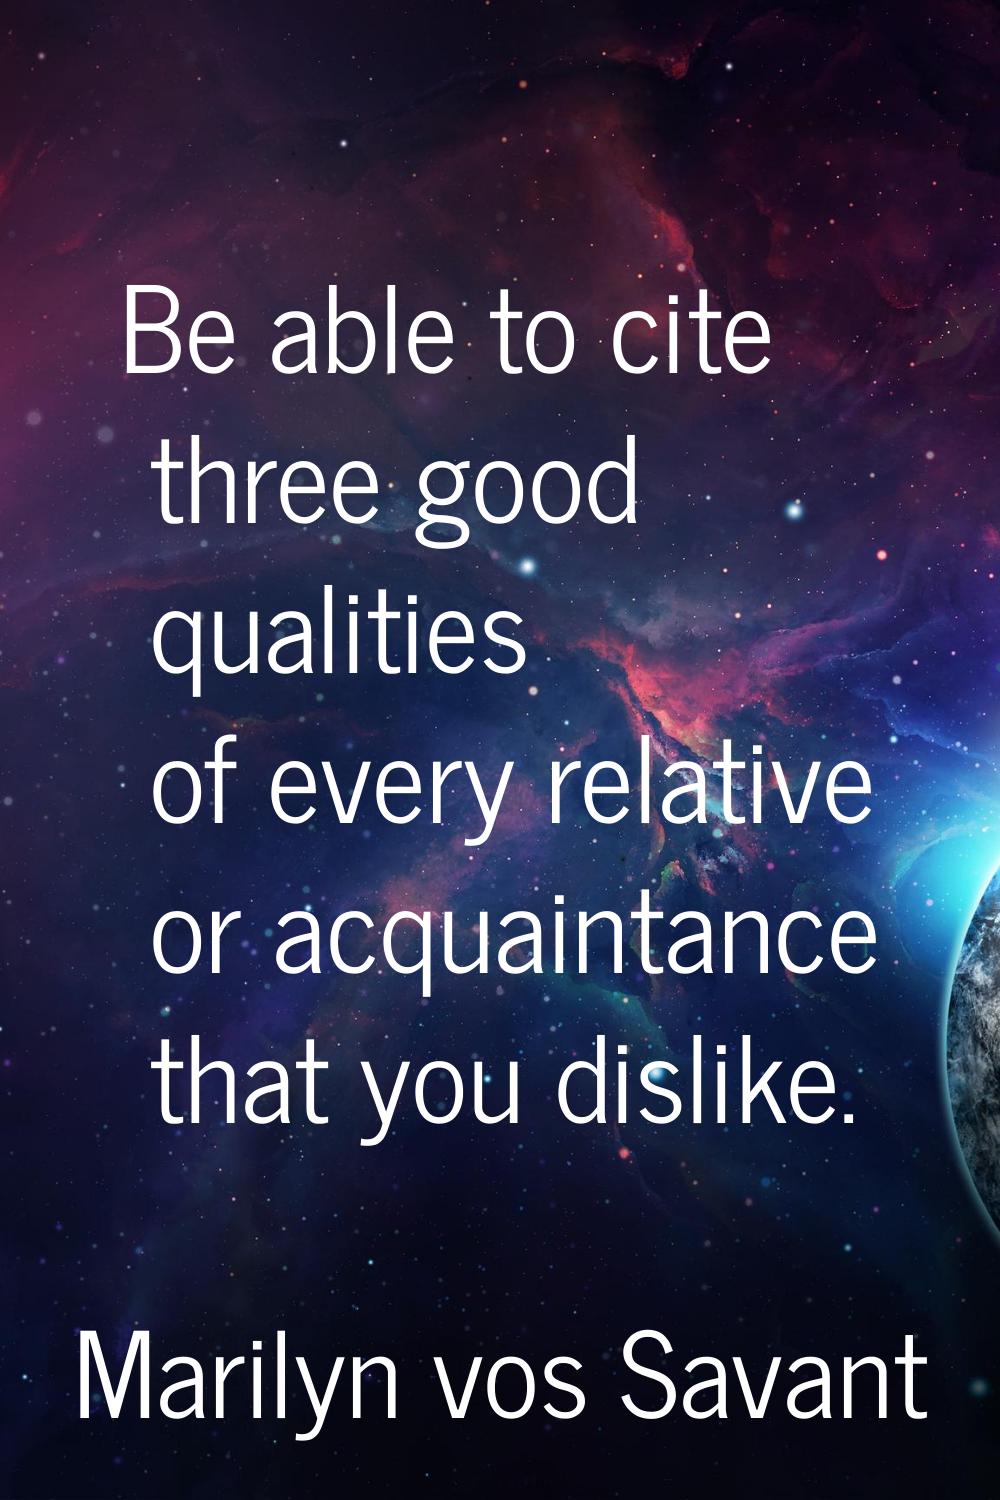 Be able to cite three good qualities of every relative or acquaintance that you dislike.